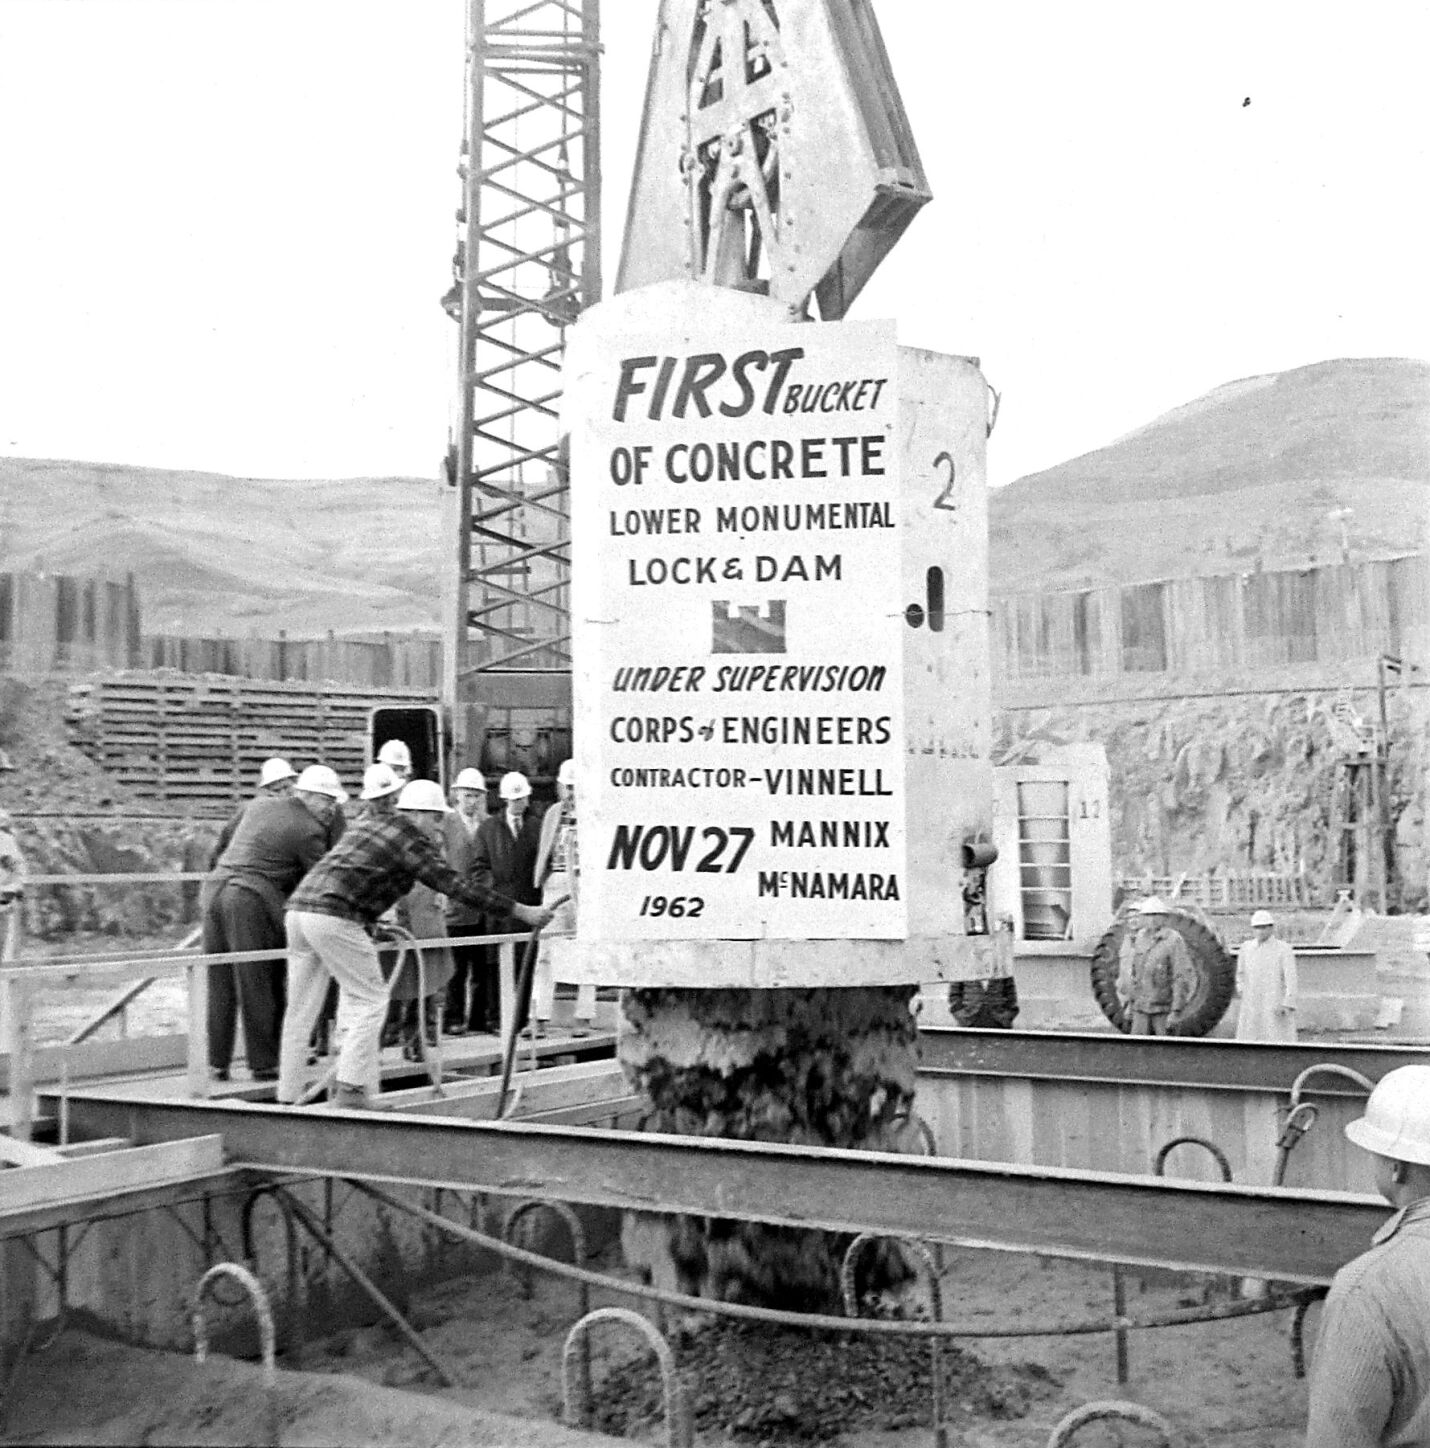 The first concrete poured at Lower Monumental Lock and Dam, Nov. 27, 1962, is commemorated with a sign on the side of the bucket. The hydroelectric run-of-the-river dam on the Snake River bridges Franklin and Walla Walla counties, 43 miles north of Walla Walla and six miles south of Kahlotus.